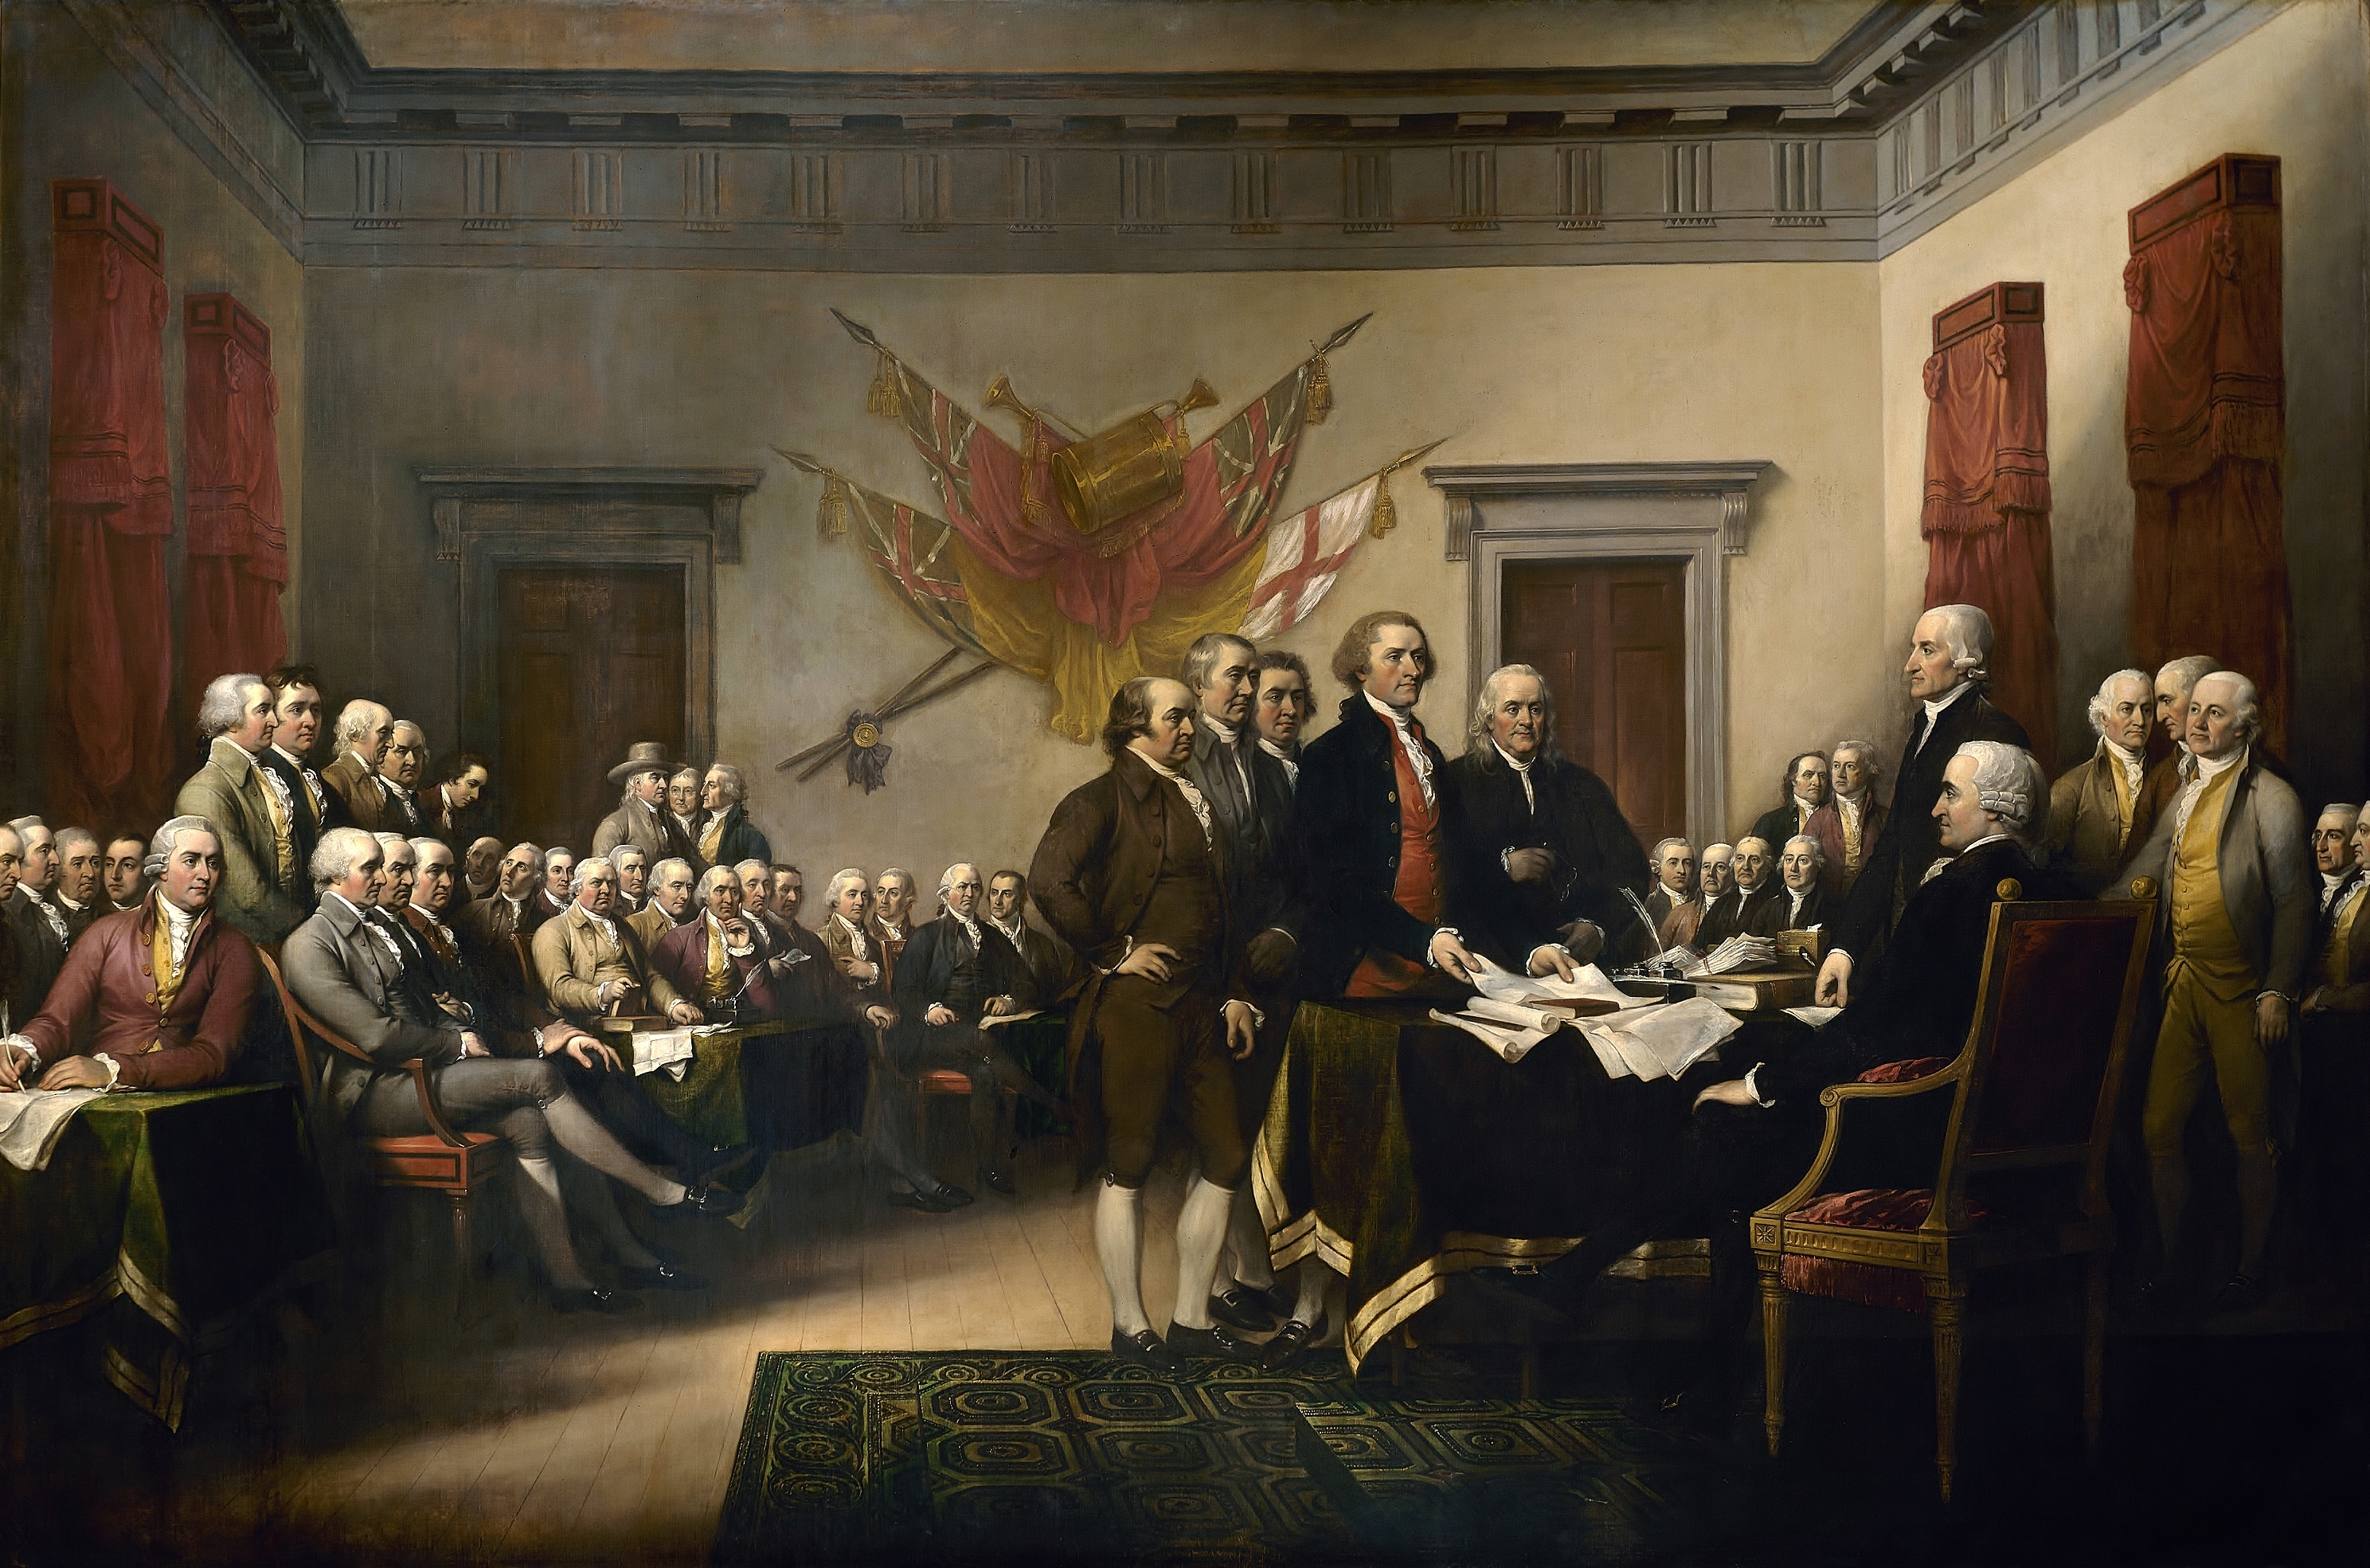 The Declaration of Independence by John Trumbull - 1818 - 3.7 m × 5.5 m United States Capitol